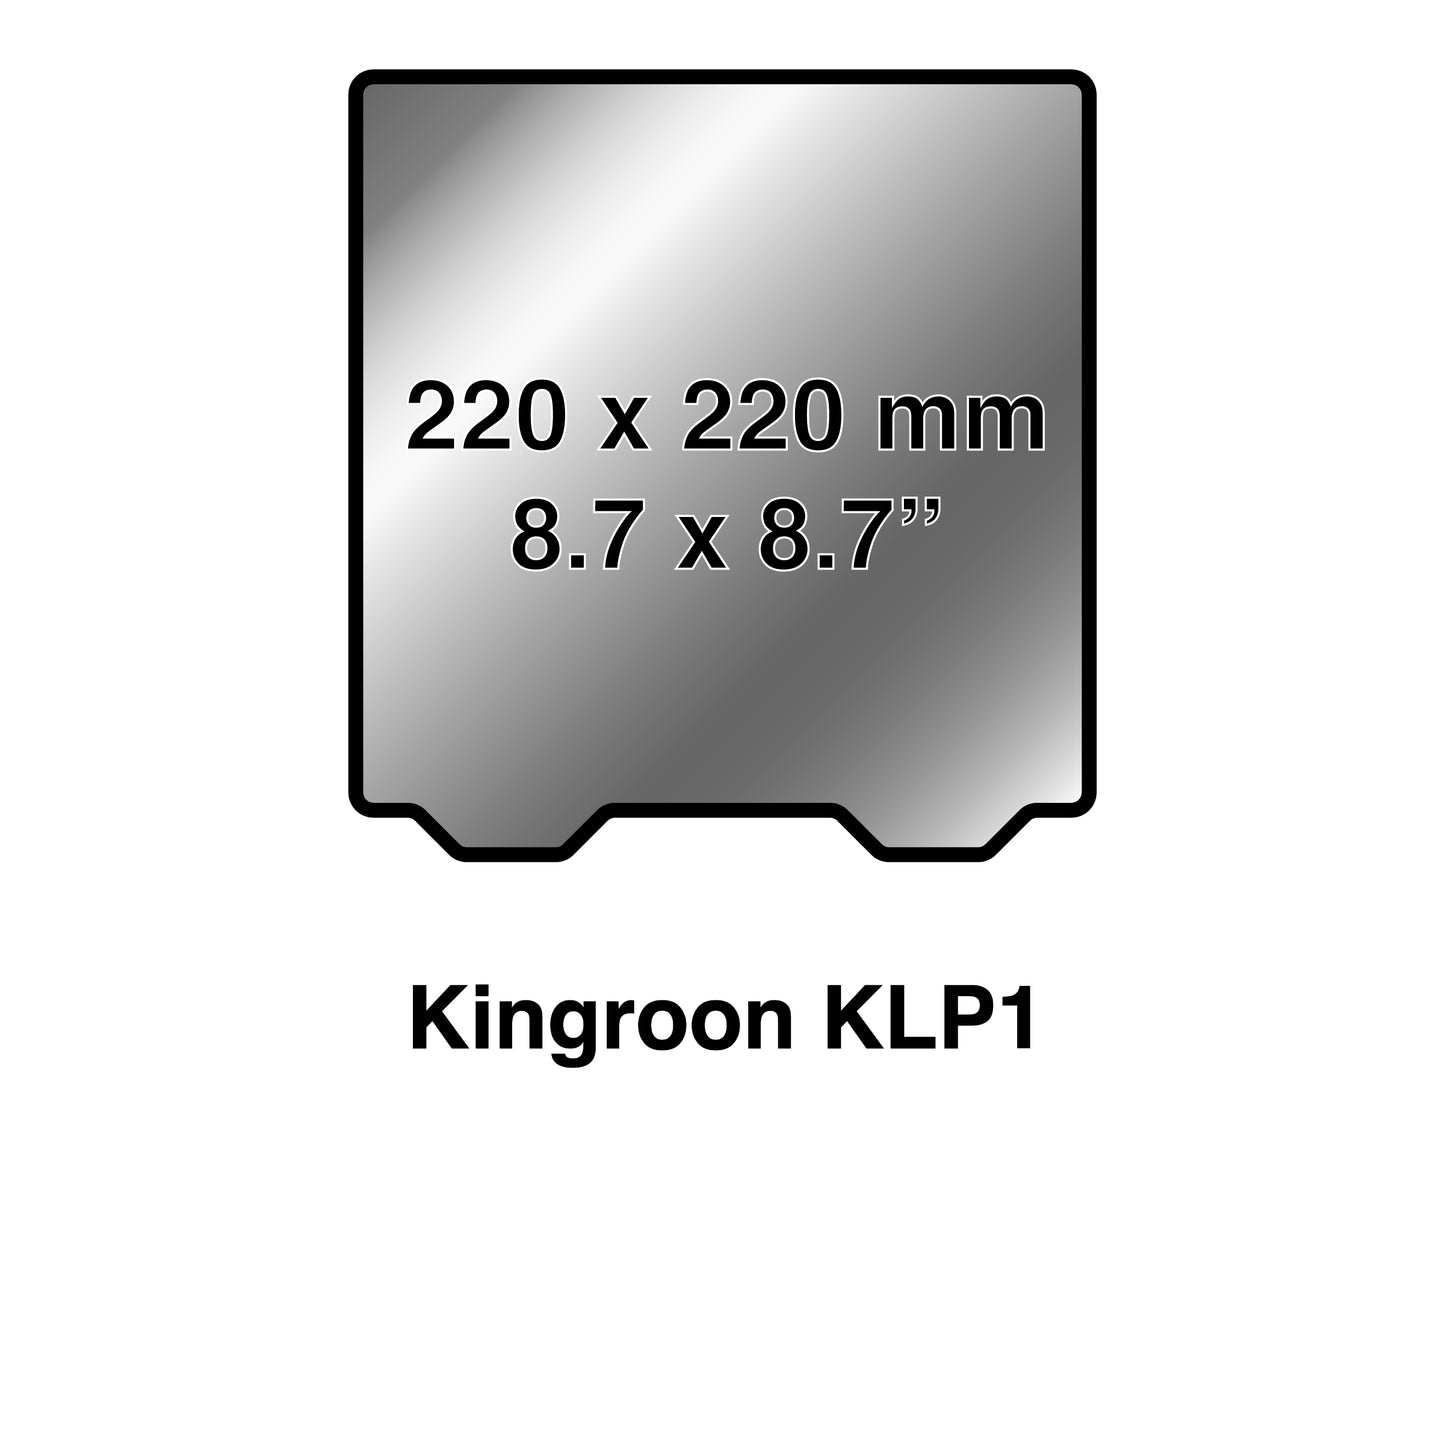 220 x 220 Kit (Square) with Pre-Installed PEX Build Surface - Kingroon KLP1